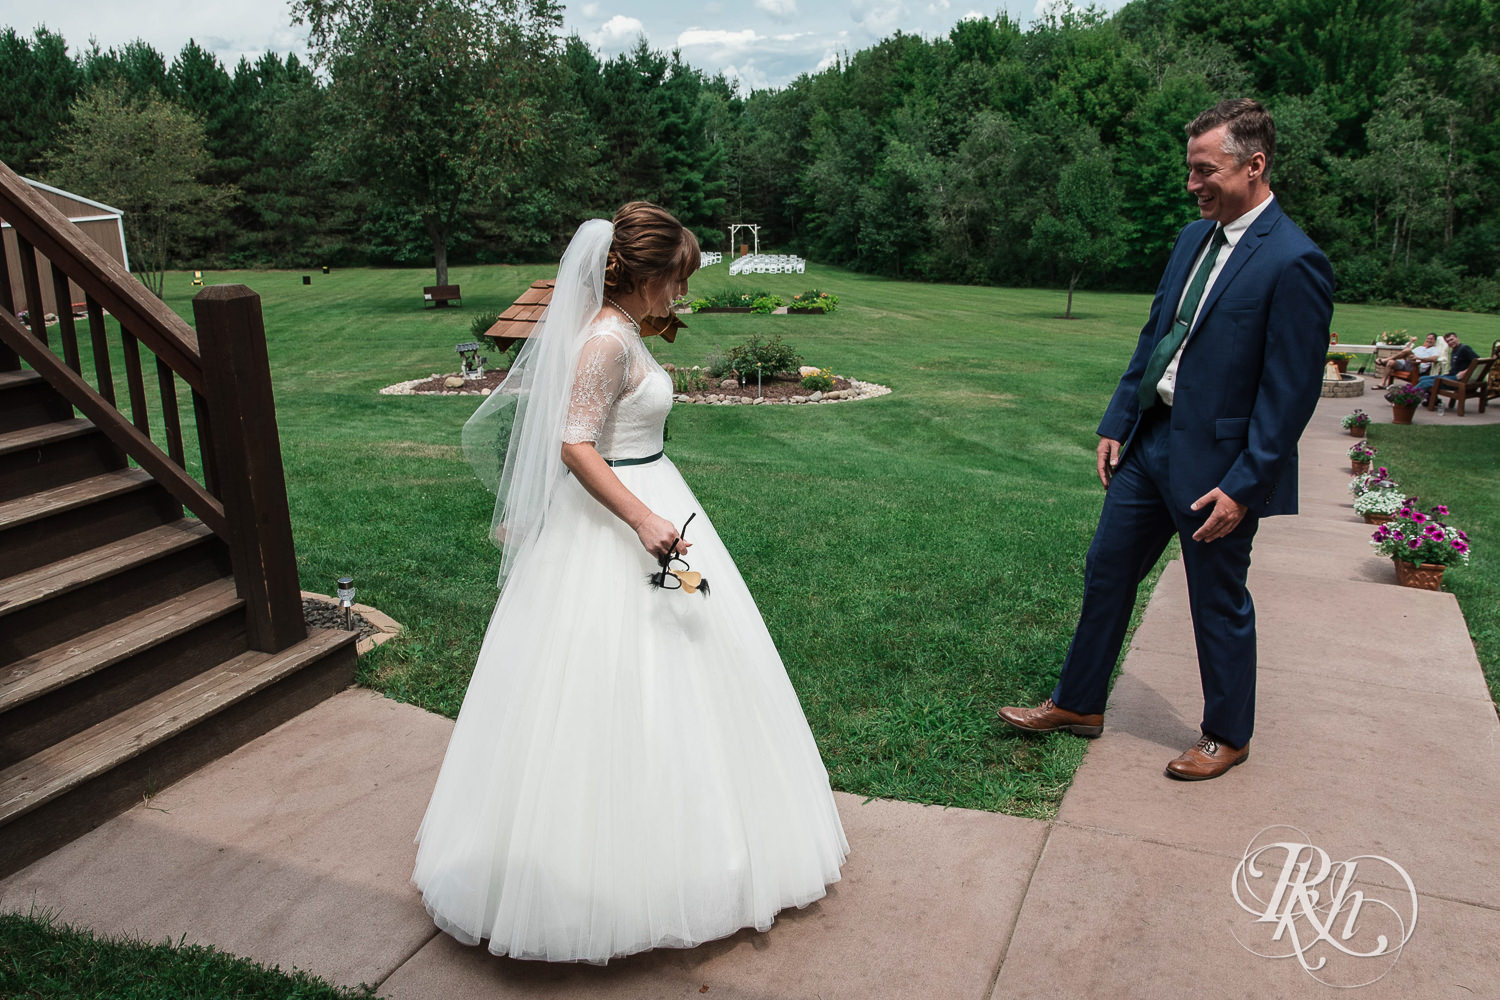 Bride and groom laugh during first look on wedding day in Elk Mound, Wisconsin.